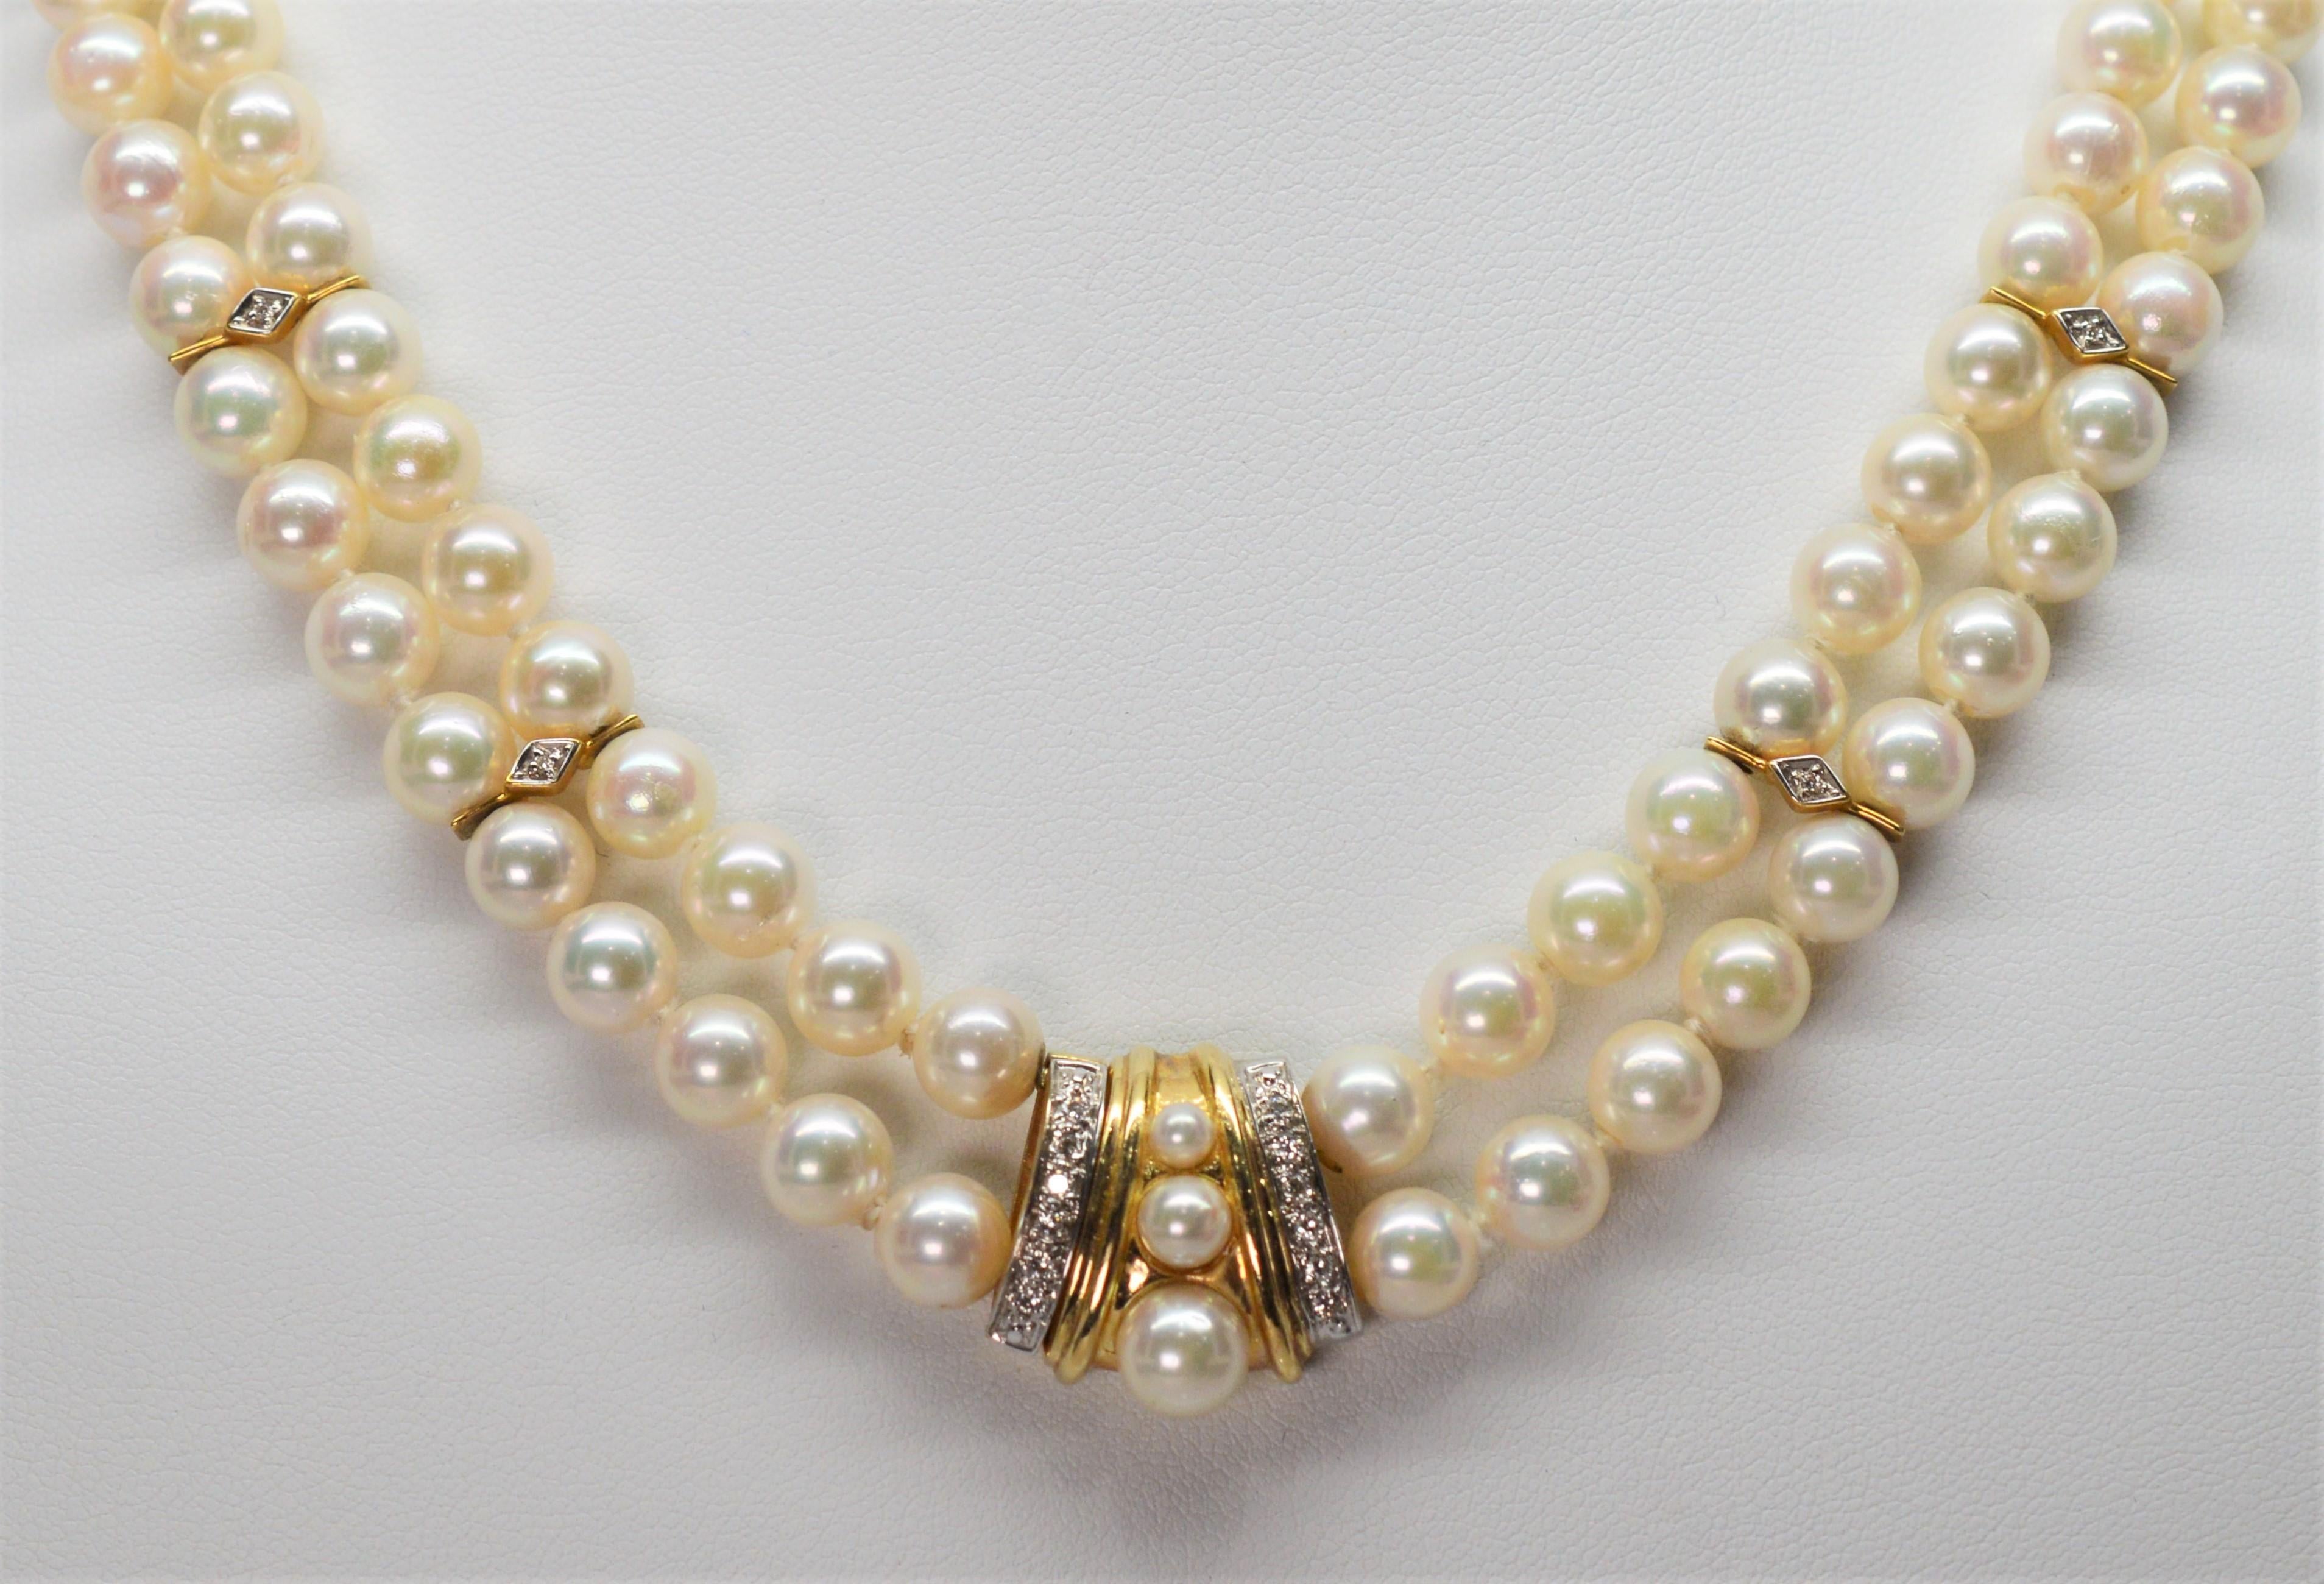 A elegant formal piece perfect for bridal or that very special occasion. Over one hundred 7 mm lustrous Akoya Pearls find their way to a spectacular fourteen karat (14K) yellow gold and diamond pendant that boldly wraps the sixteen inch double